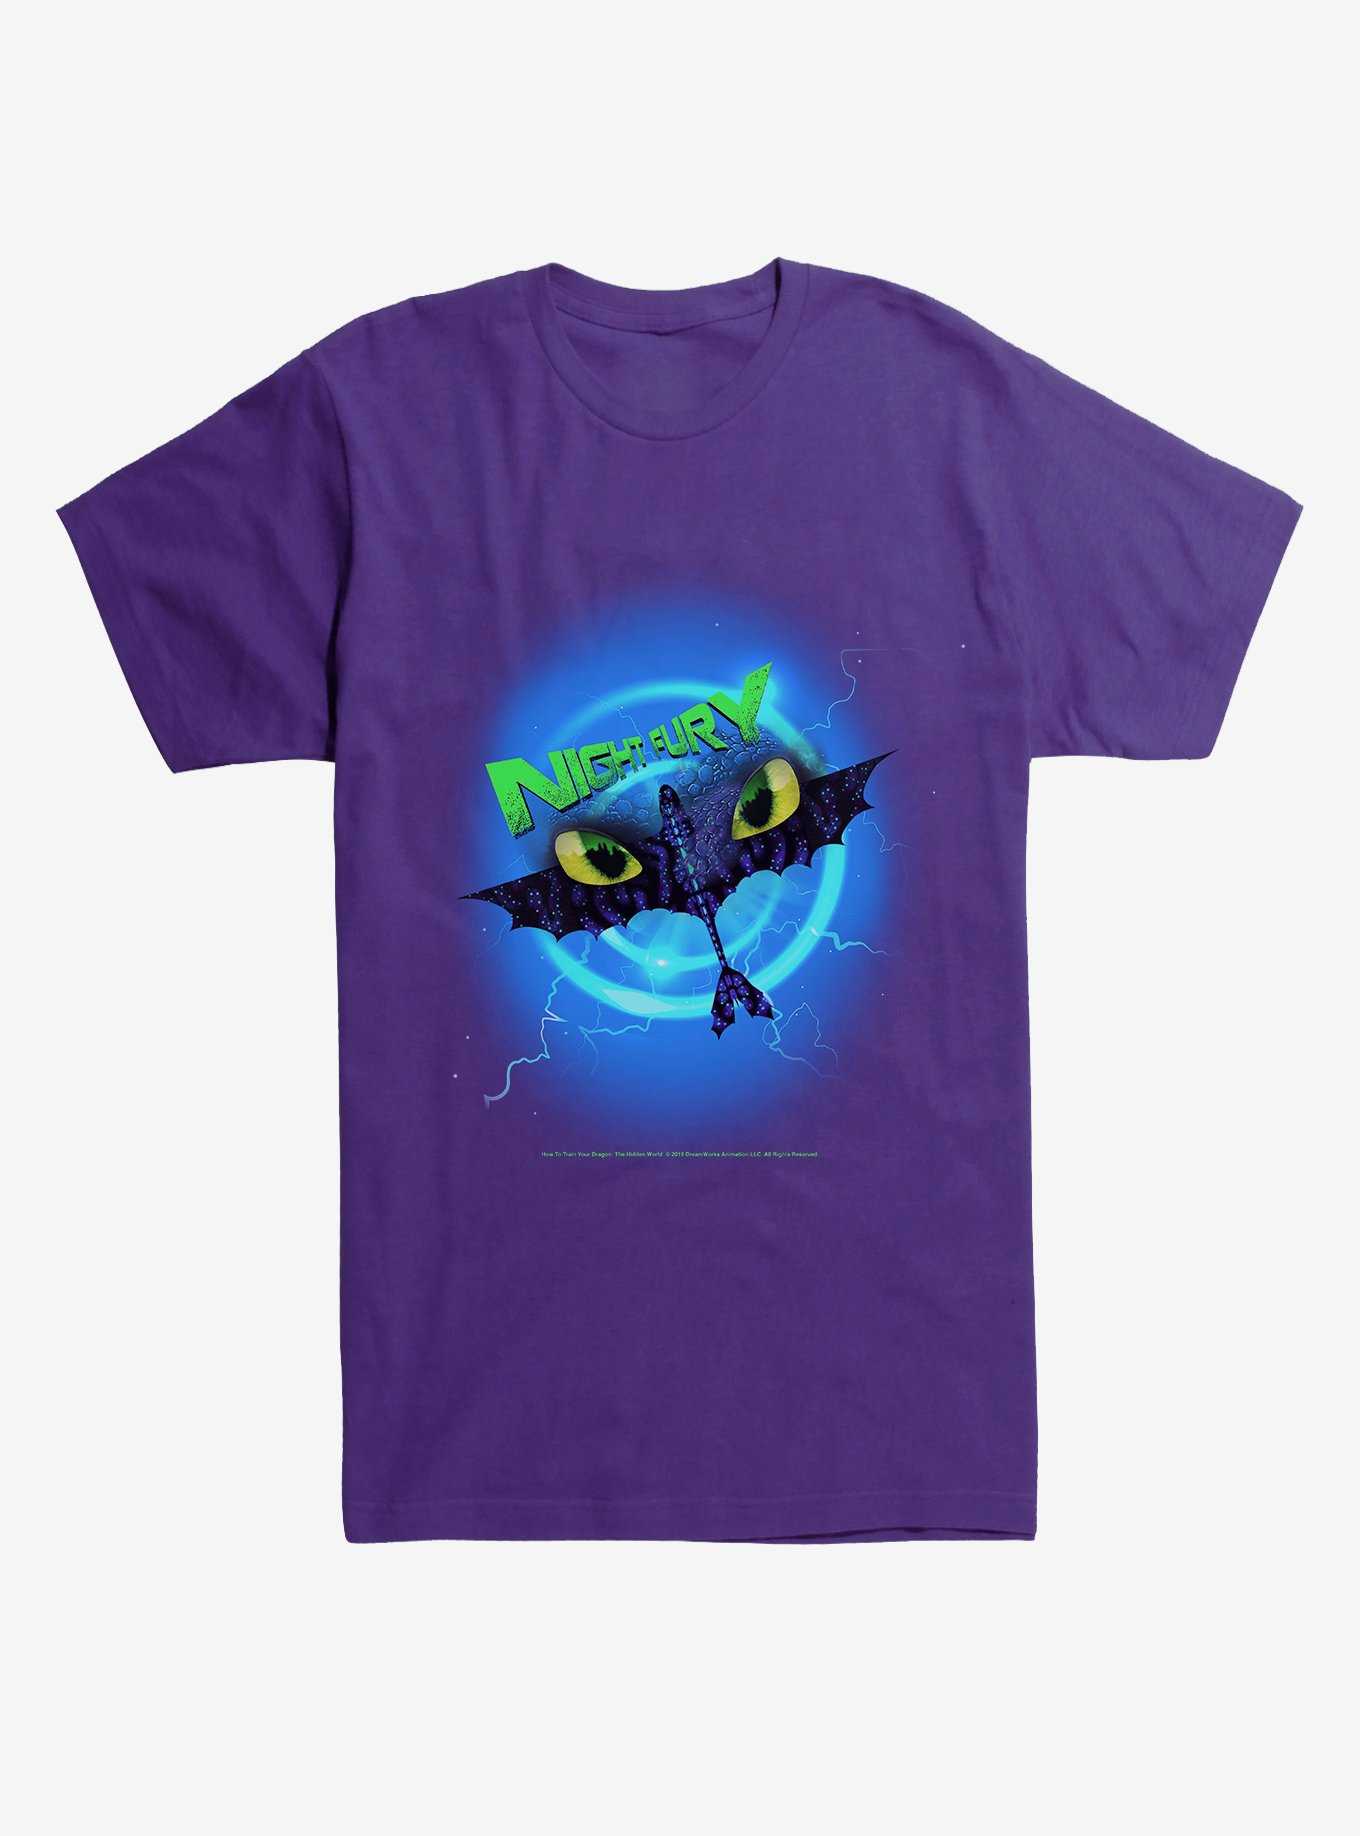 How To Train Your Dragon Night Fury T-Shirt, , hi-res